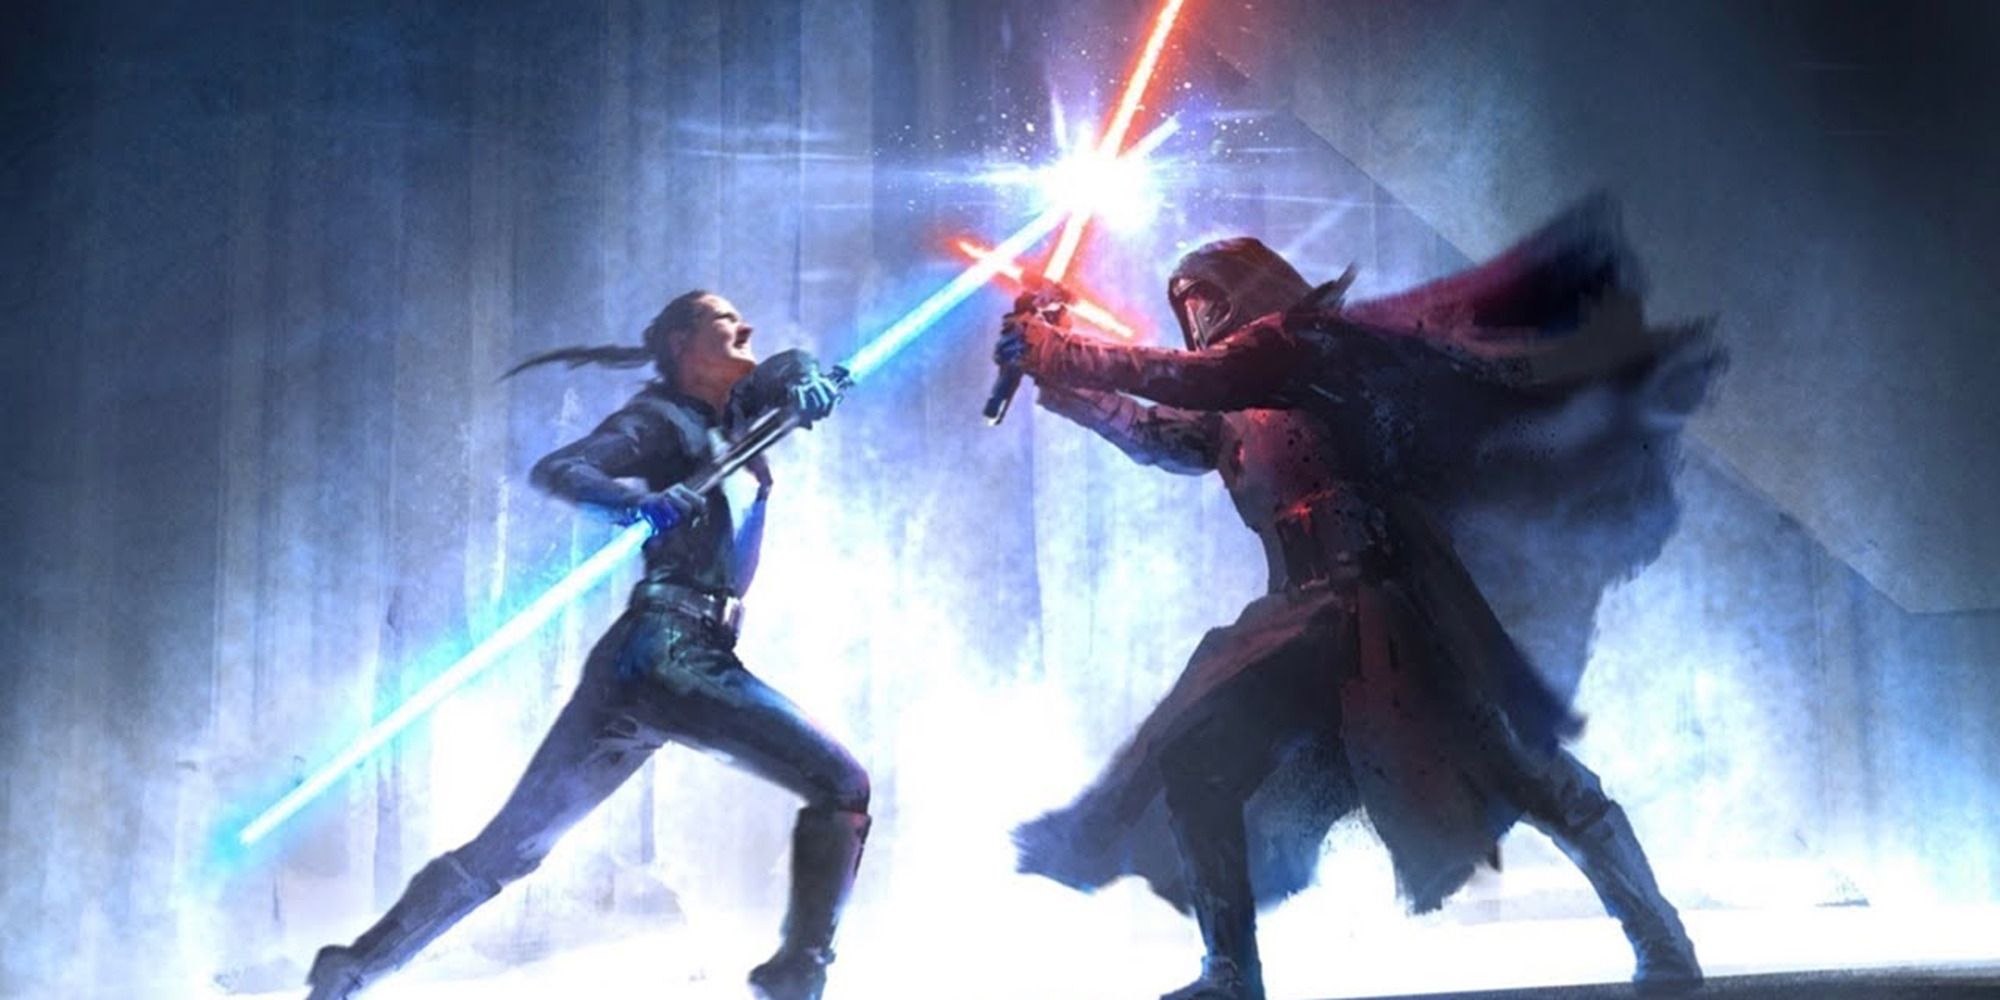 Concept art for Colin Trevorrows Duel of the Fates, with Rey fighting Kylo with lightsabers